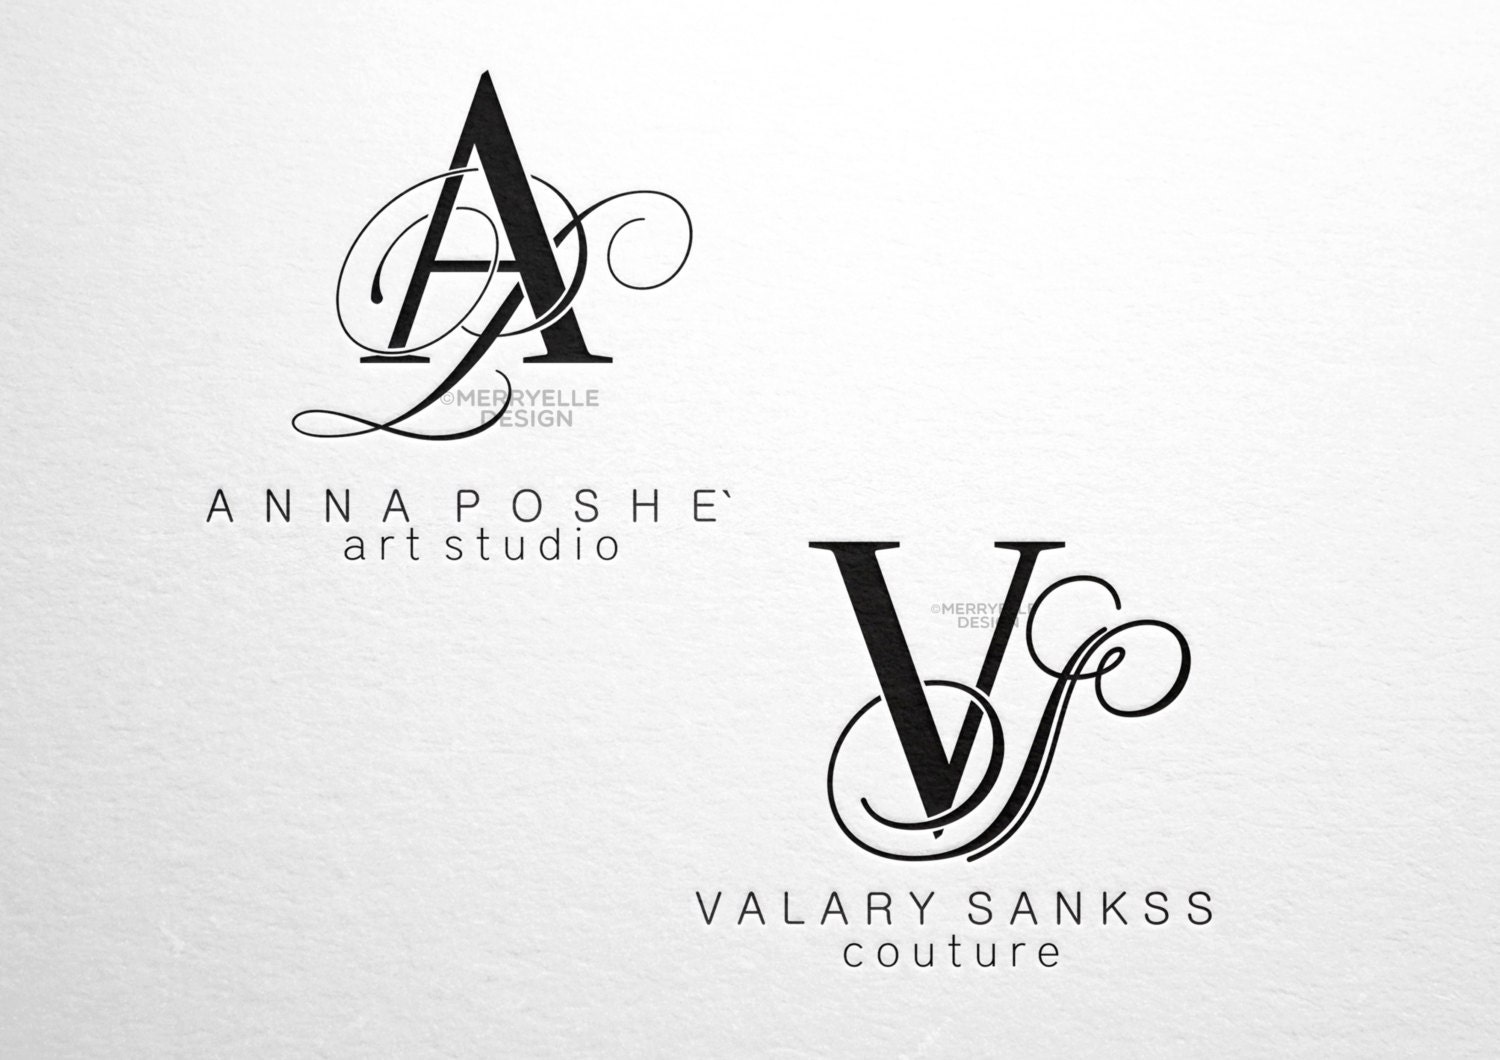 logo design online free with initials